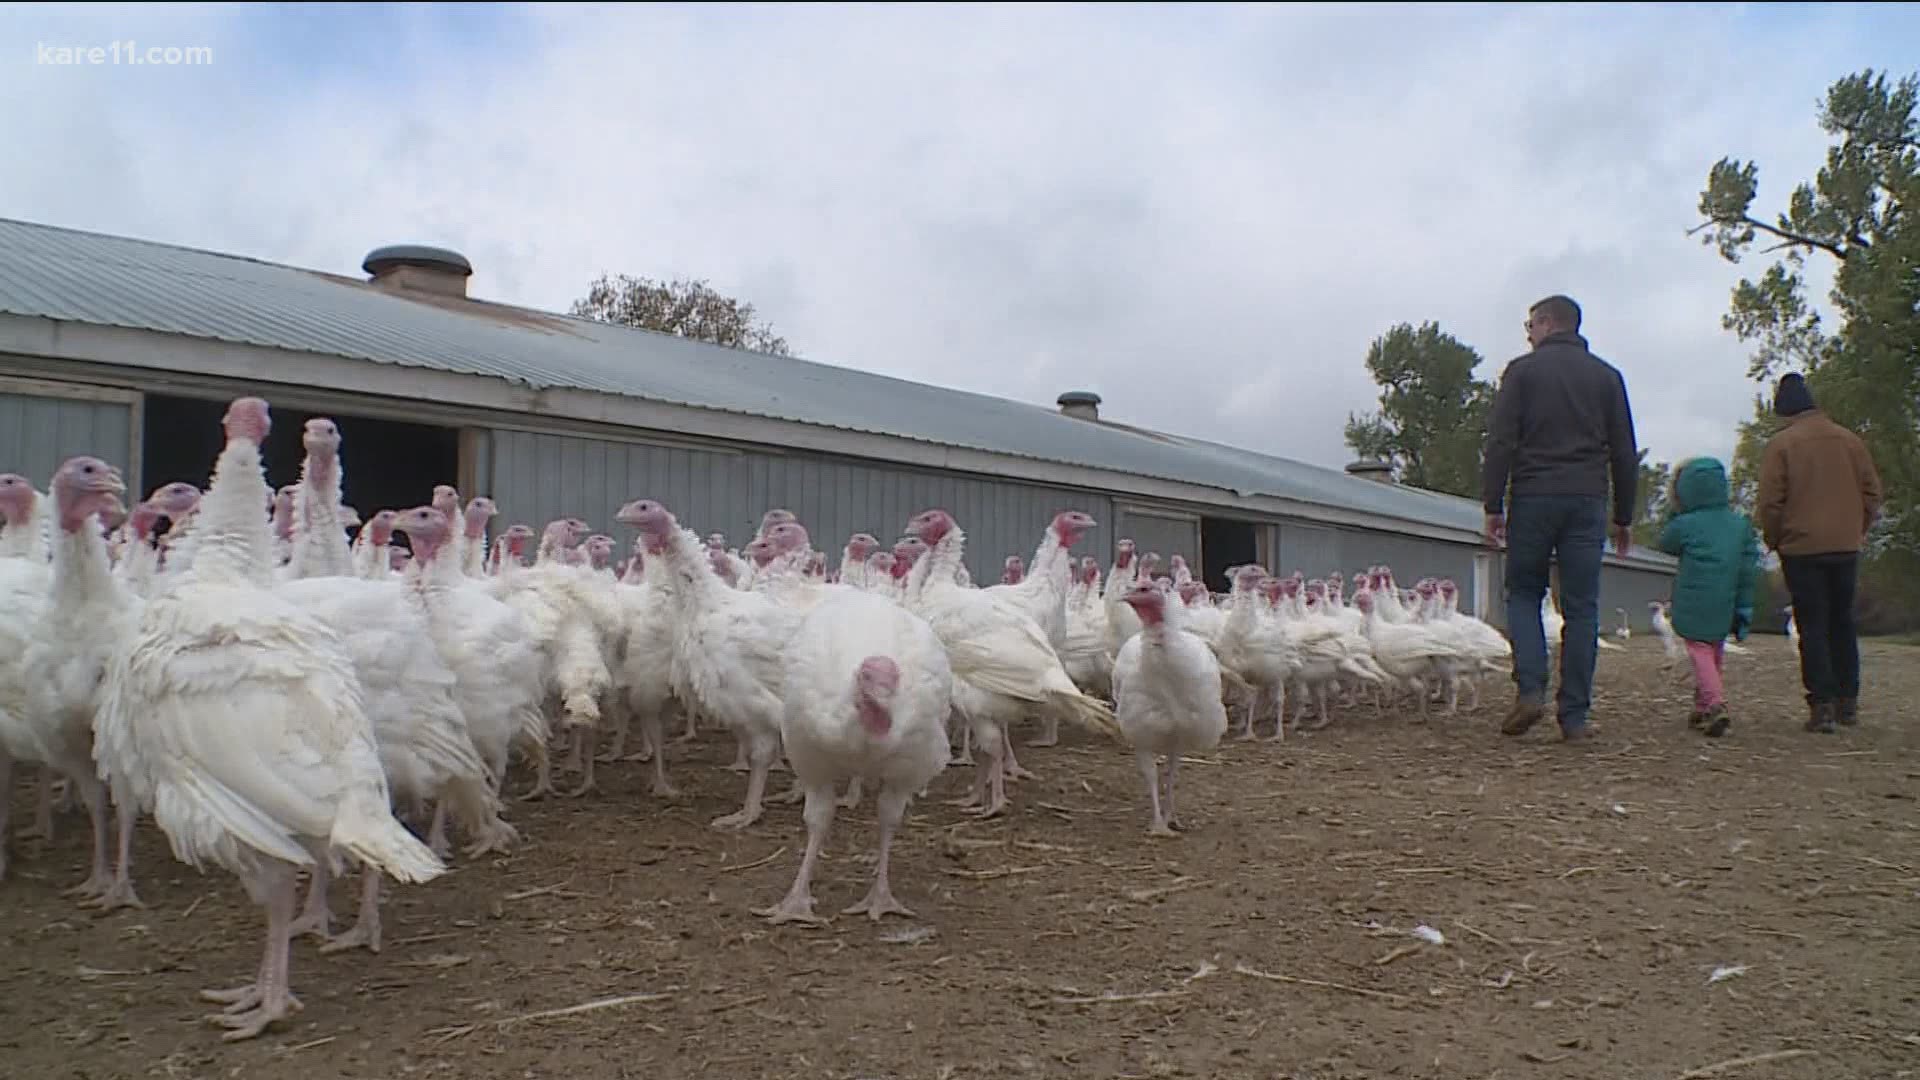 Minnesota is the largest turkey producing state in the nation, and that means a lot rides on an uncertain 2020 holiday